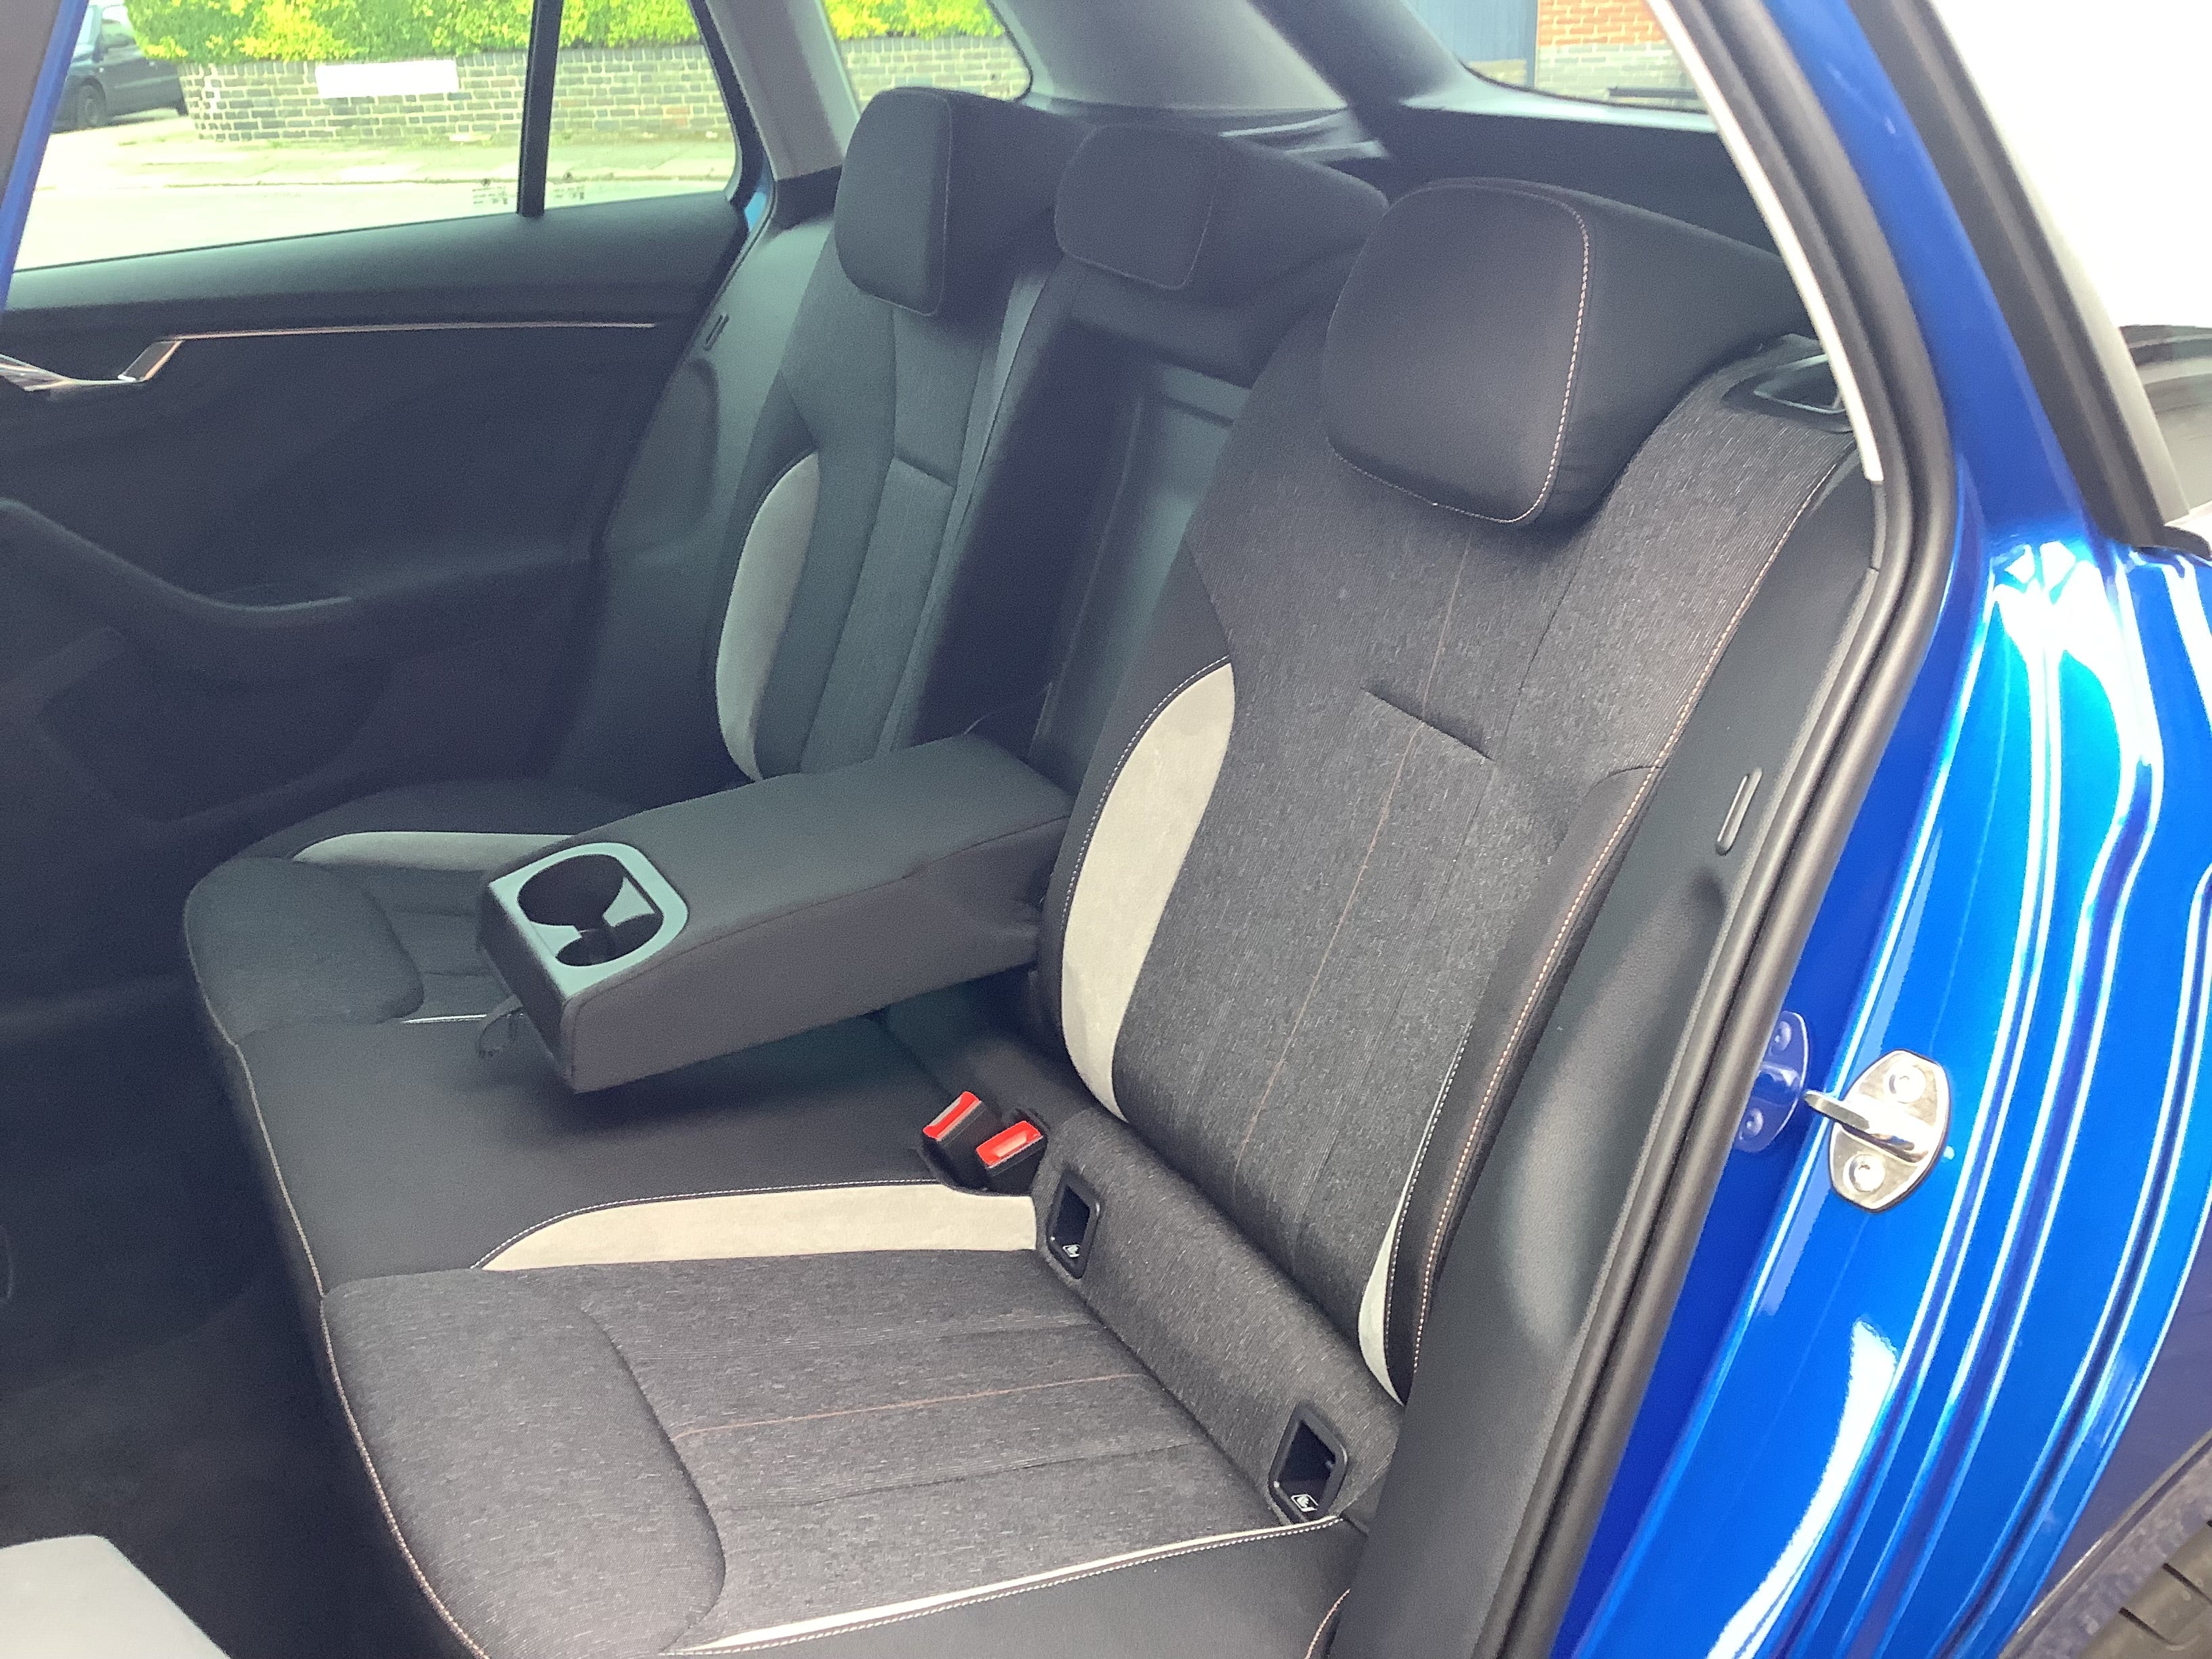 Child safety is built in with ISOFIX for front passenger seat and rear seats